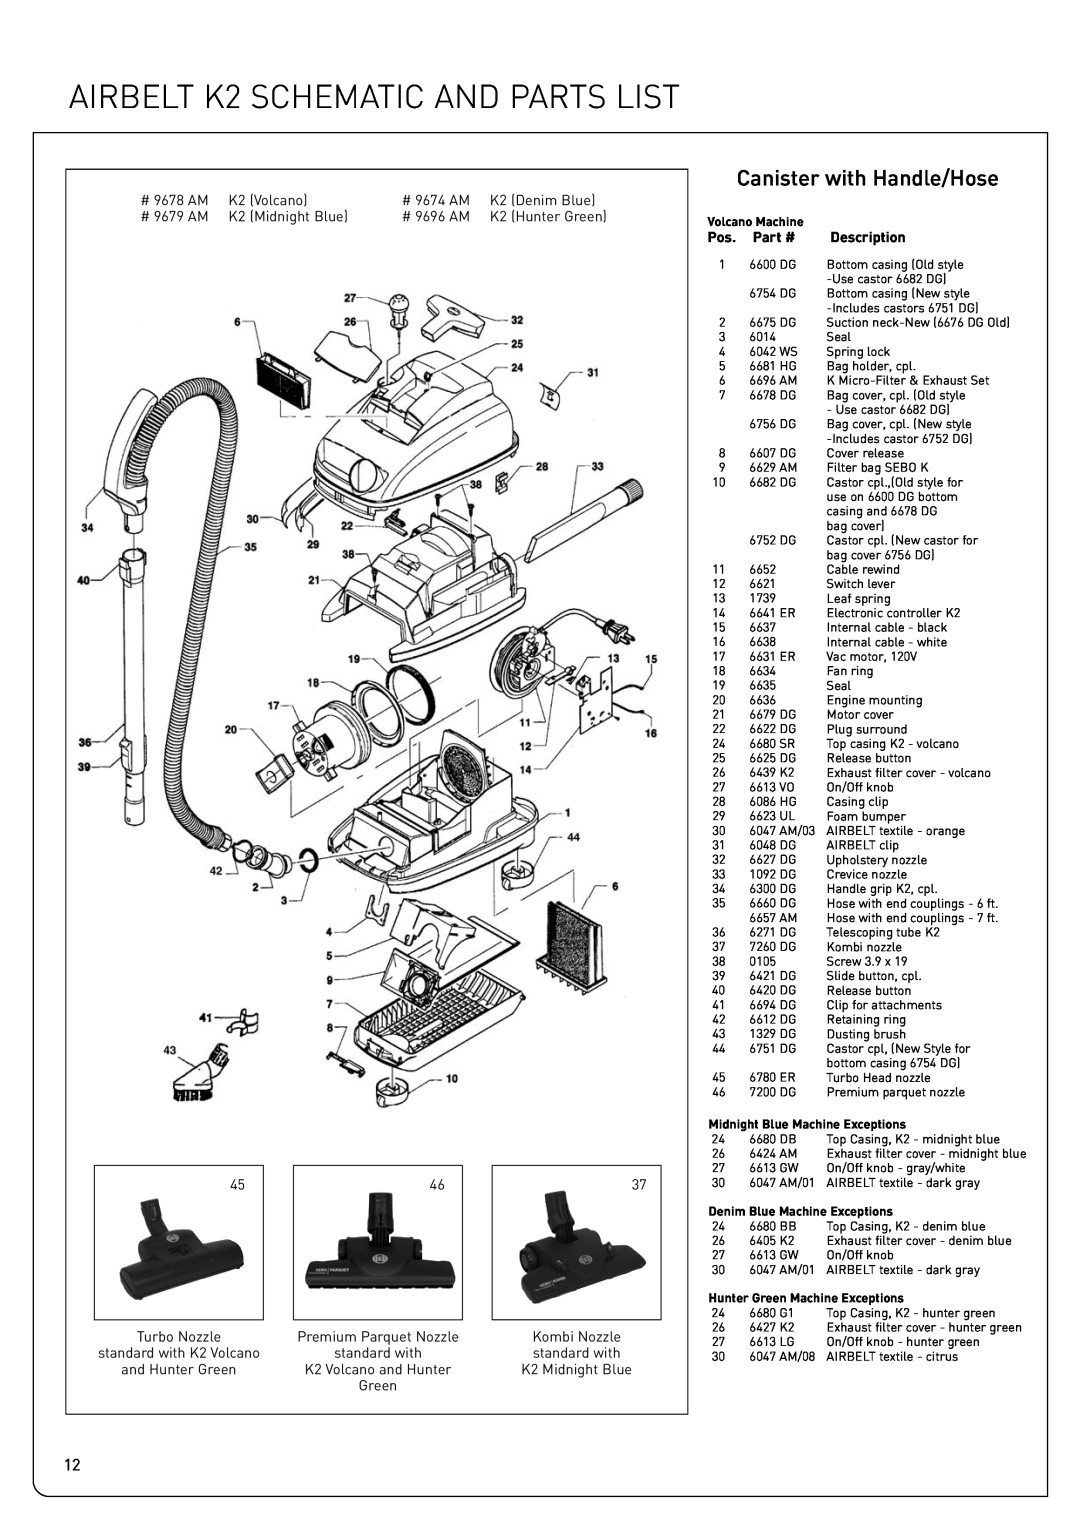 Sebo owner manual AIRBELT K2 SCHEMATIC AND PARTS LIST, Canister with Handle/Hose, Part #, Description 